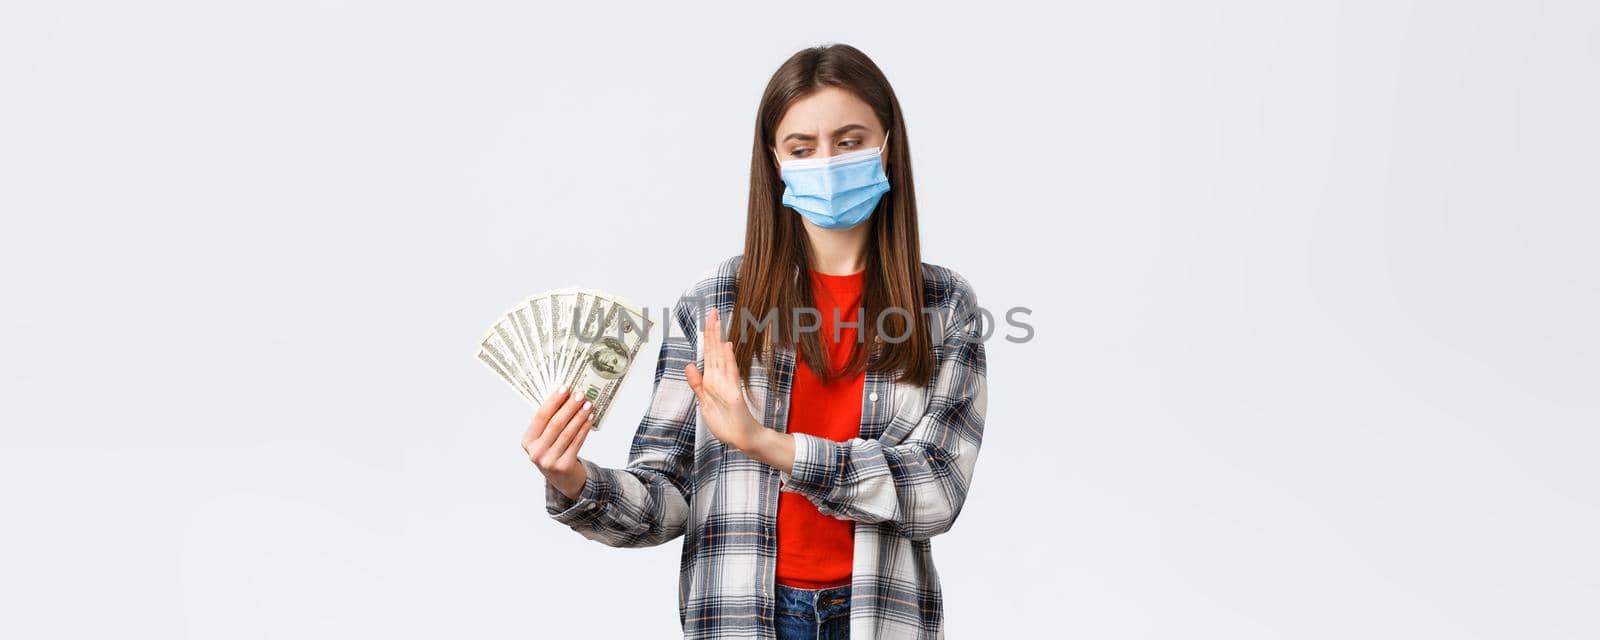 Money transfer, investment, covid-19 pandemic and working from home concept. Displeased girl in medical mask rejecting taking cash as bribe, show stop sign to dollars and frowning bothered.